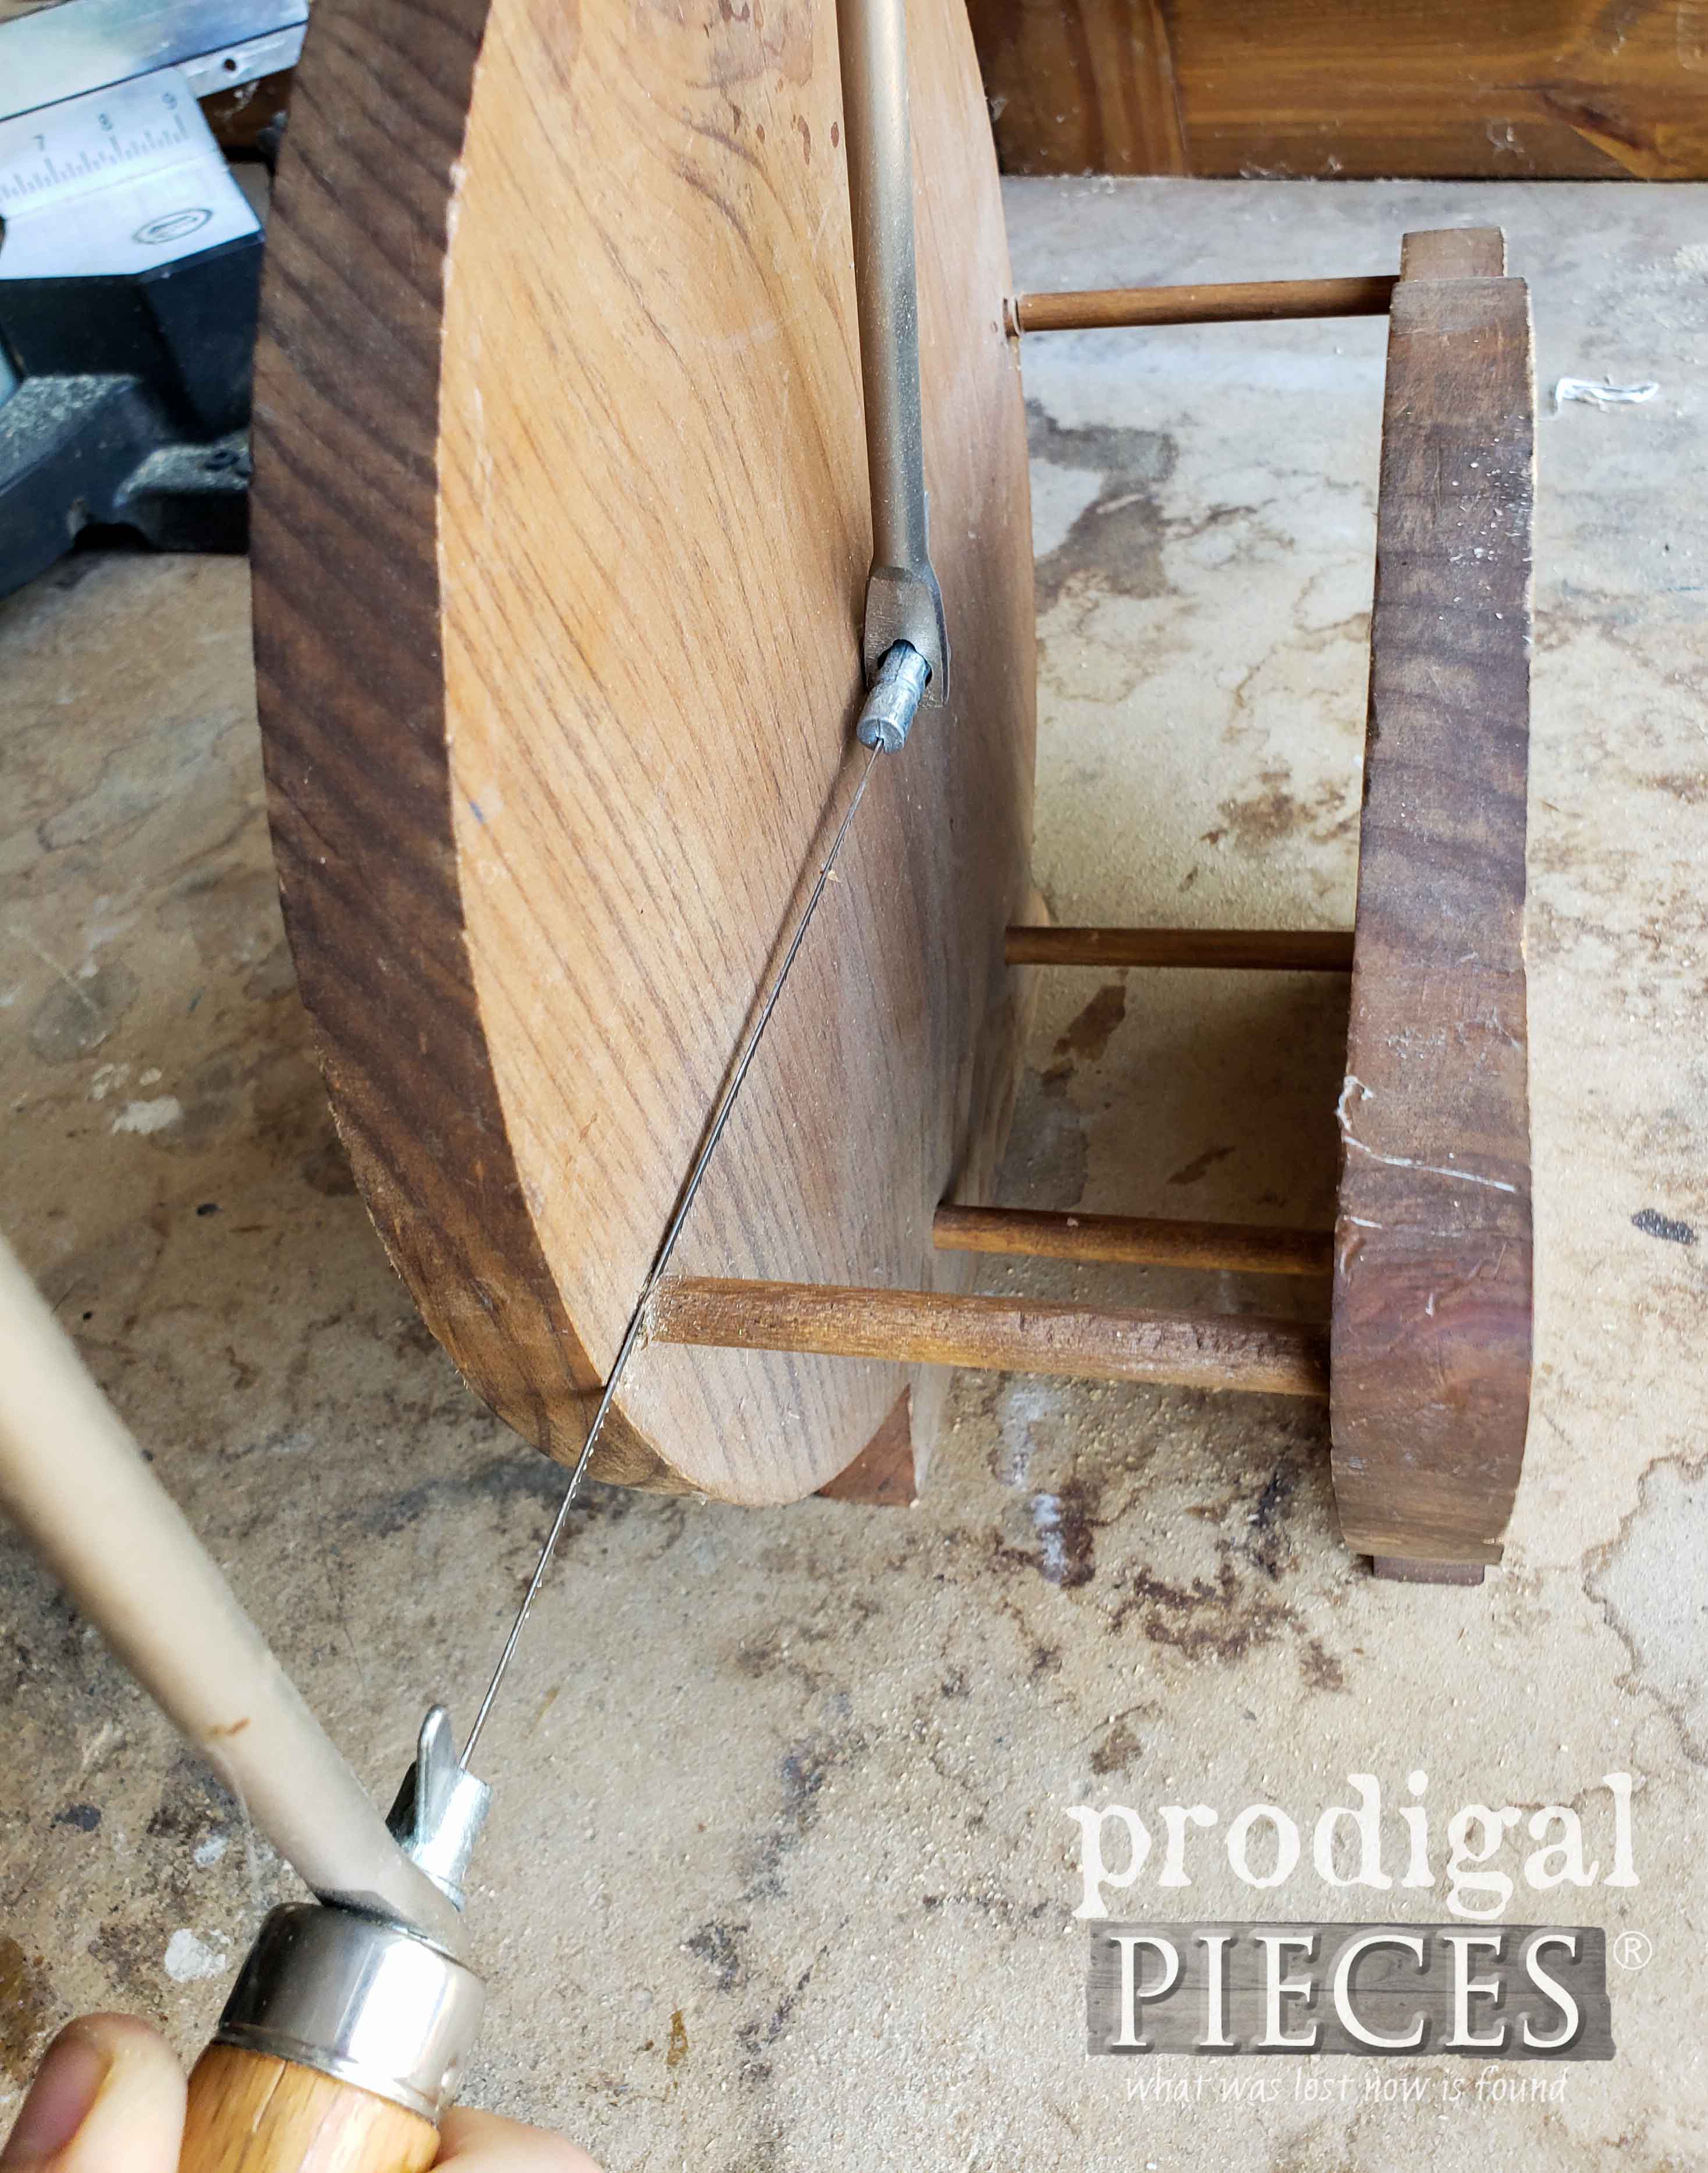 Cutting Upcycled Paper Plate Holder with Coping Saw | prodigalpieces.com #prodigalpieces